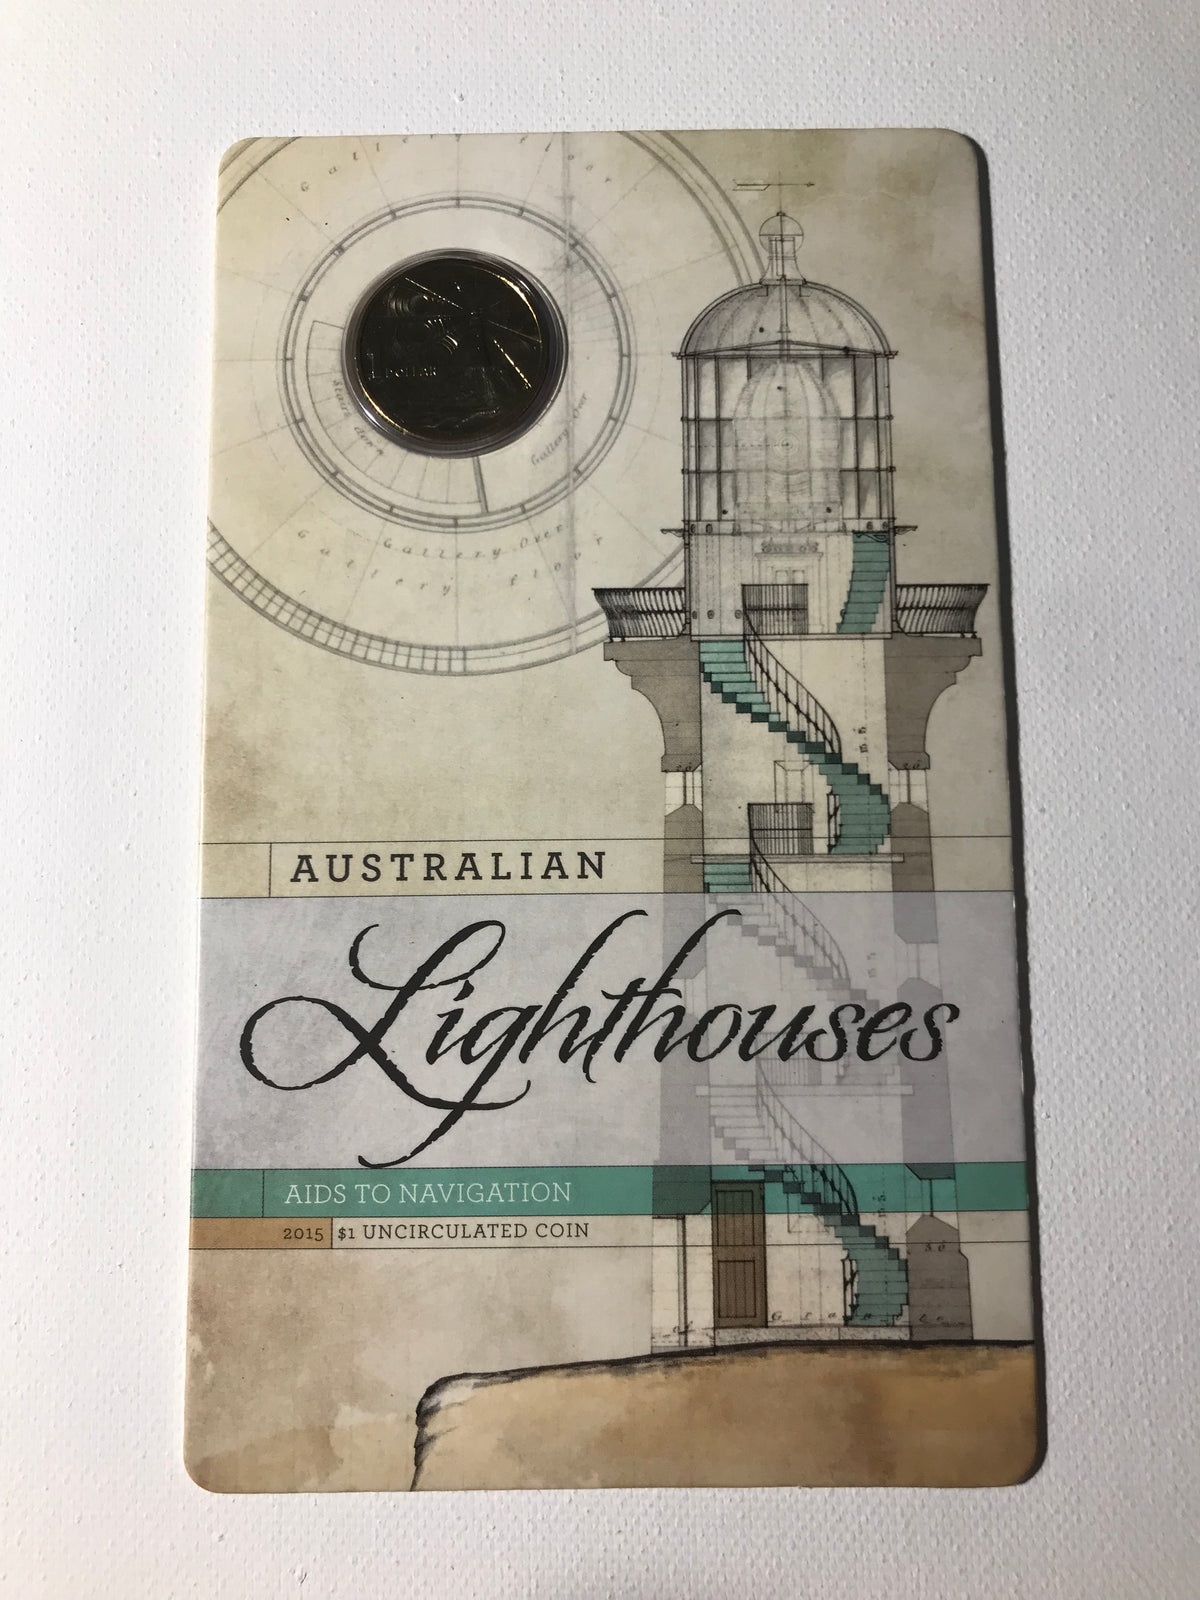 2015 $1 Australian Lighthouses. Aids to Navigation. Carded Uncirculated Coin.